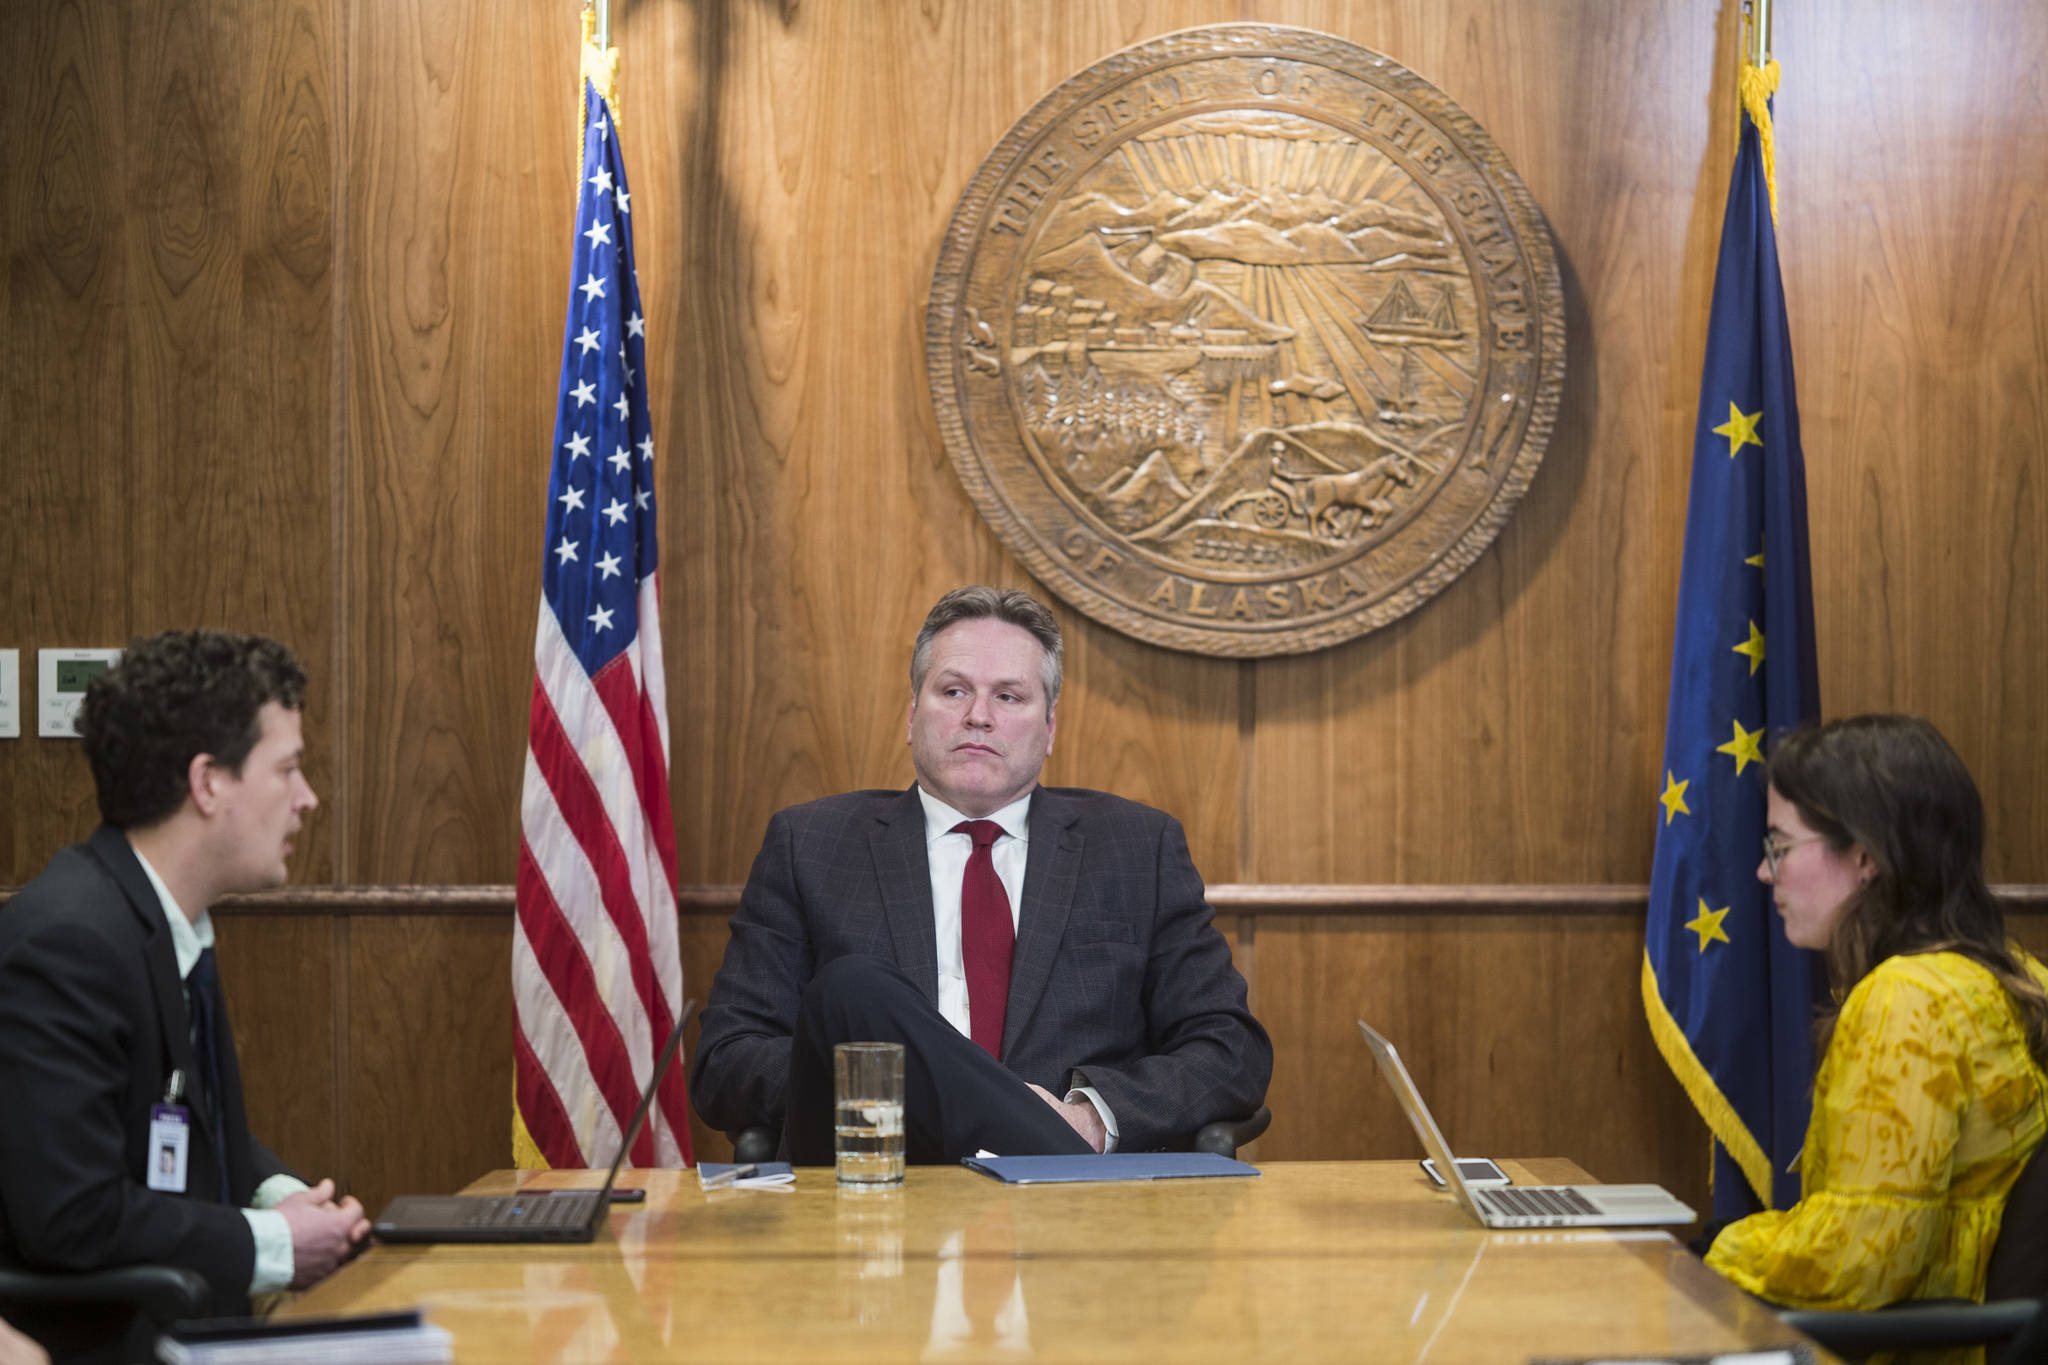 Juneau Empire reporters Kevin Baird, left, and Mollie Barnes interview Gov. Mike Dunleavy at the Capitol on Tuesday, Feb. 26, 2019. (Michael Penn | Juneau Empire)